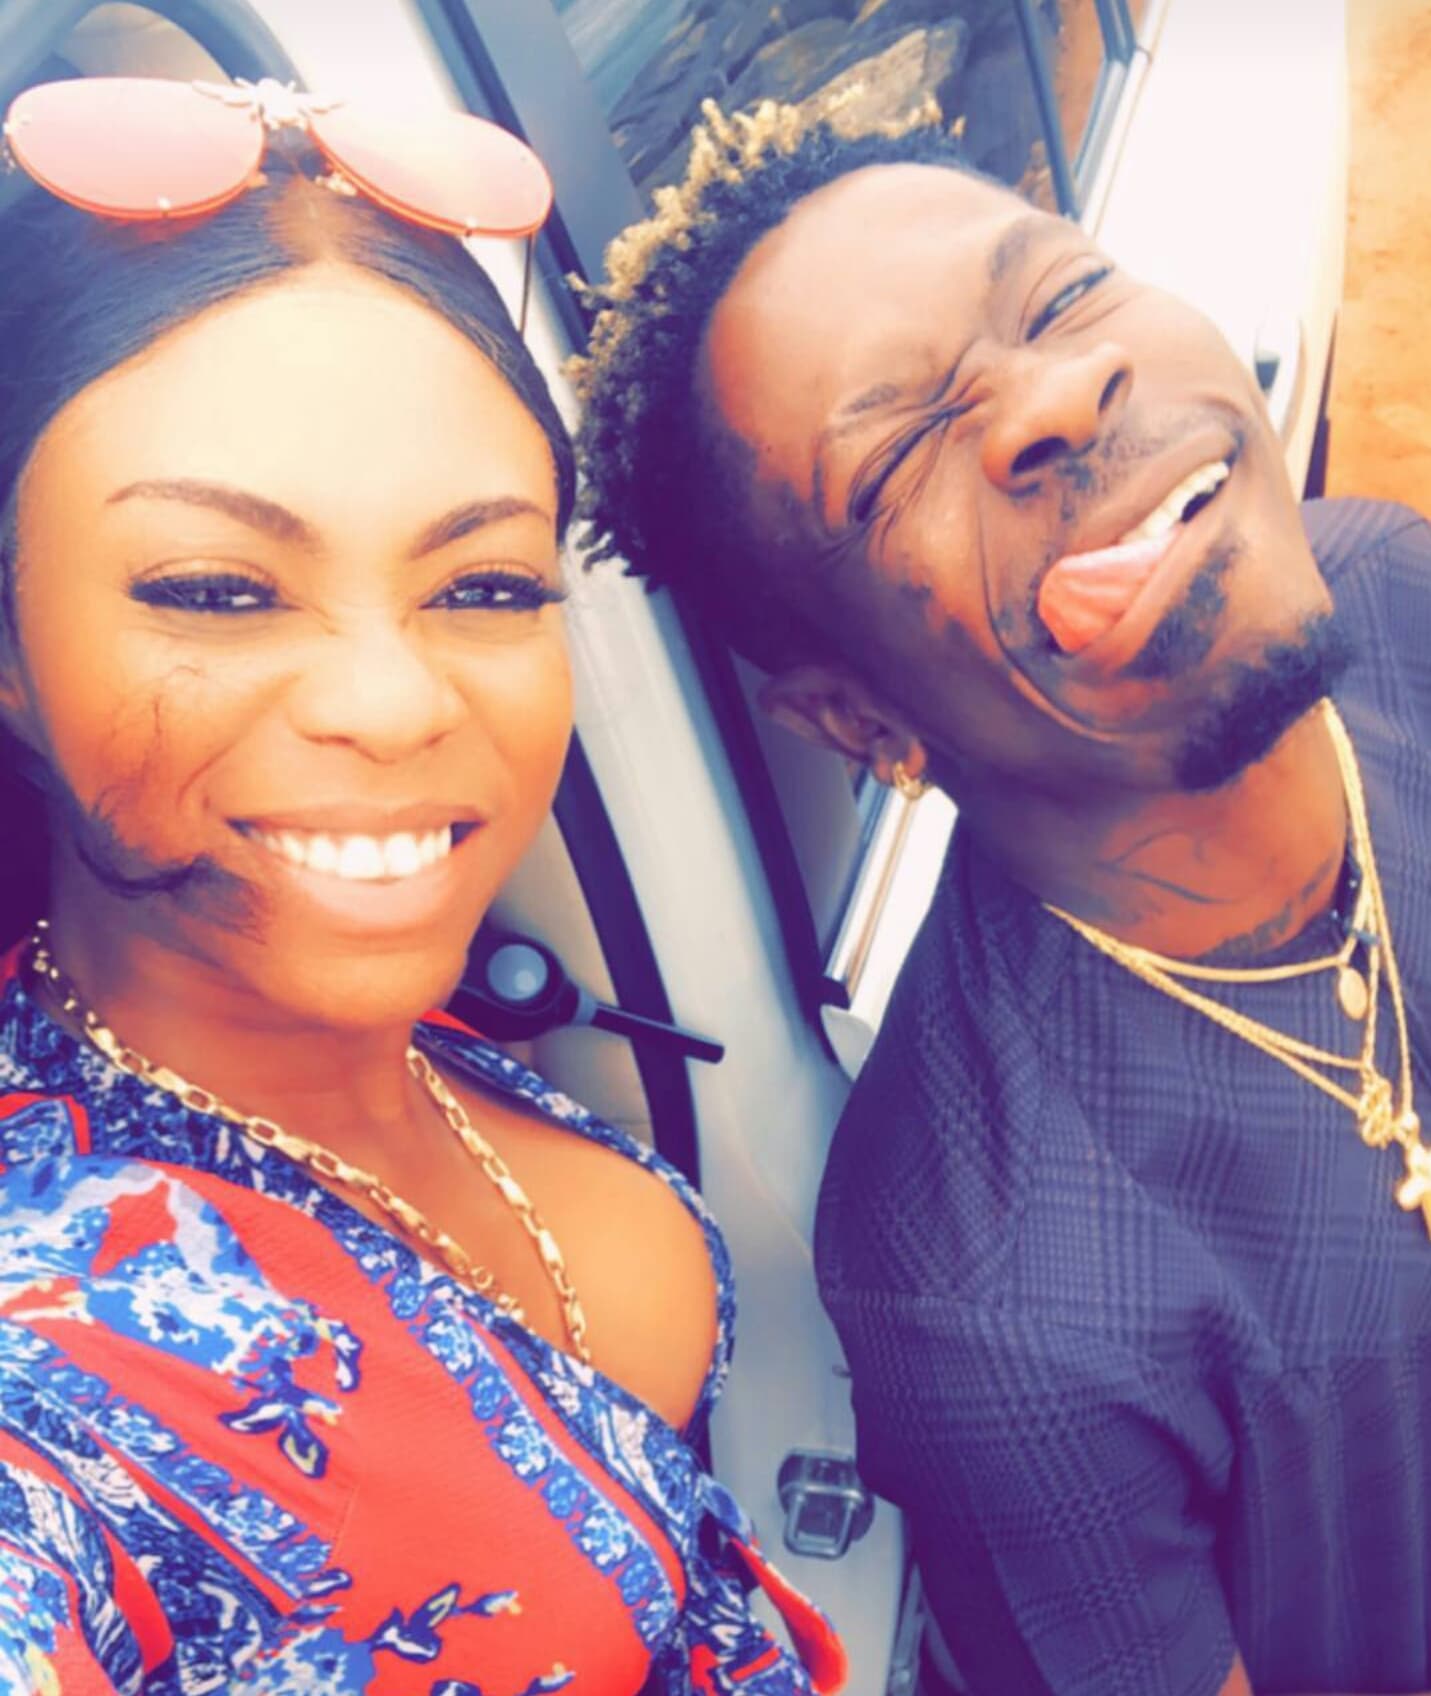 Shatta Wale had only Ghc75 on him when we met - Shatta Michy reveals